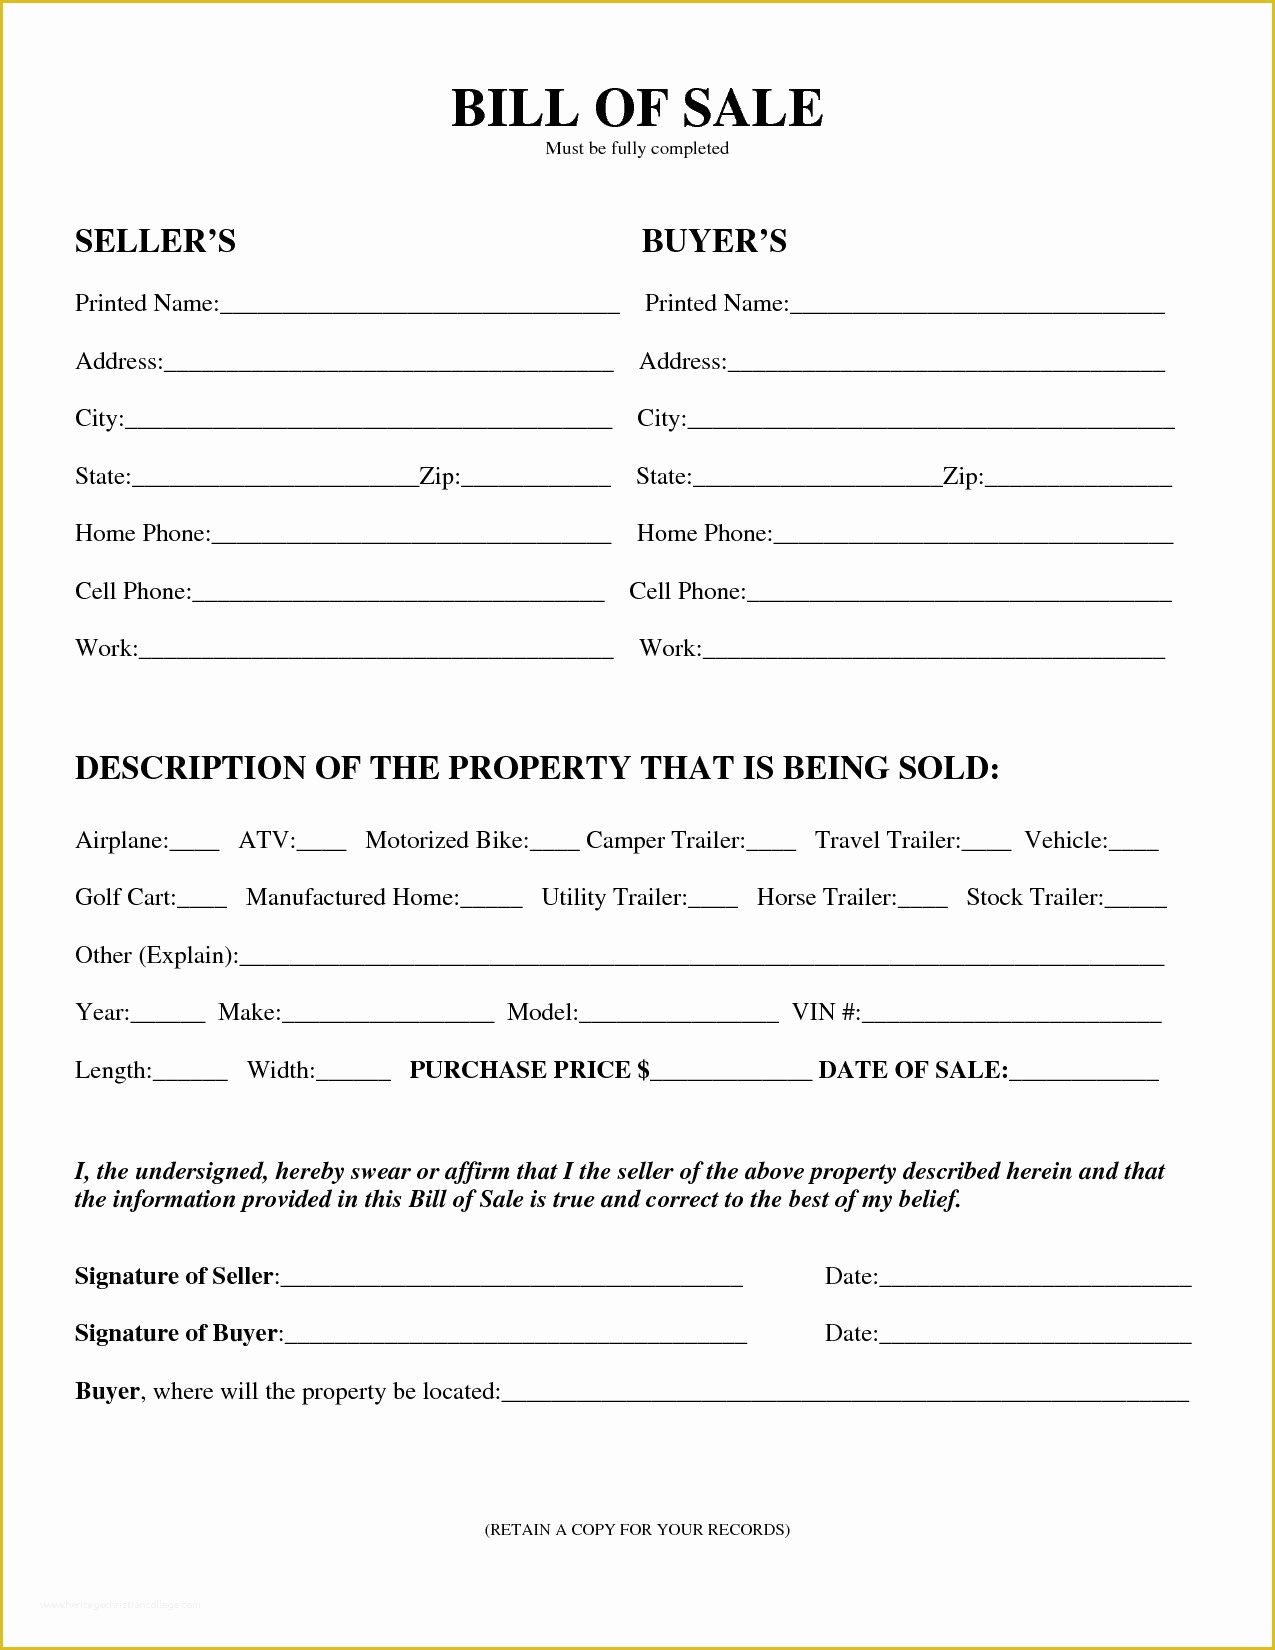 bill-of-sale-free-template-form-of-free-printable-equipment-bill-sale